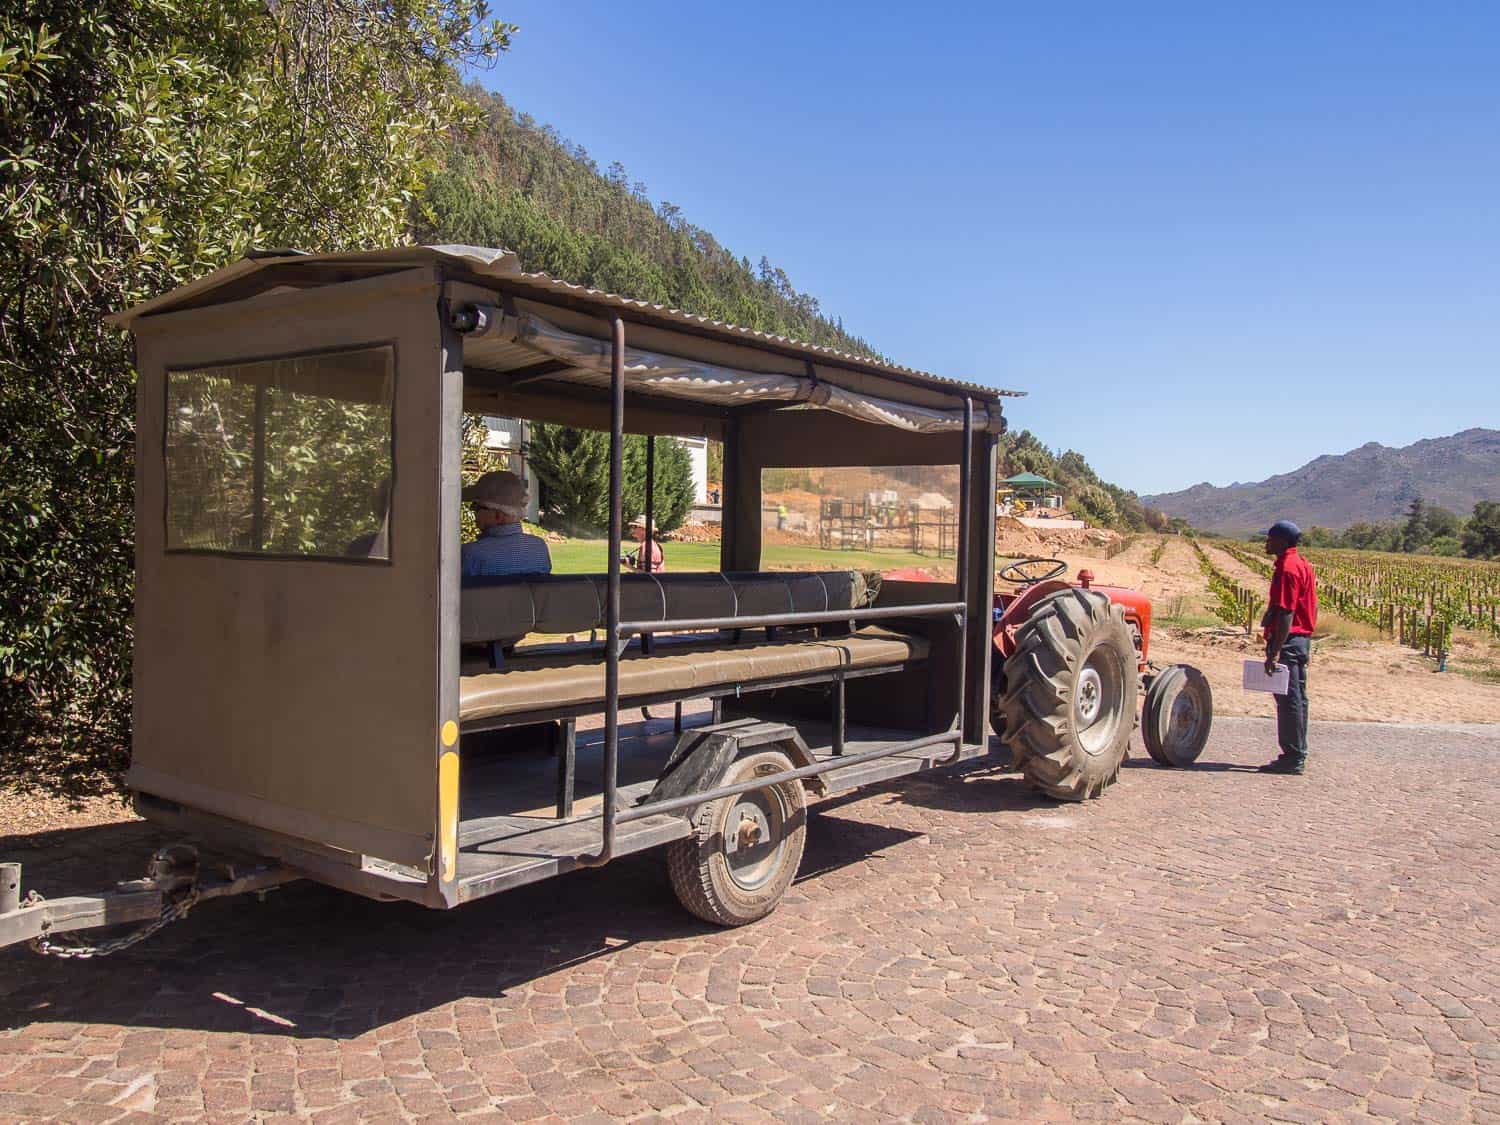 Franschhoek wine tram review - The trailor that connects the tram to the wineries